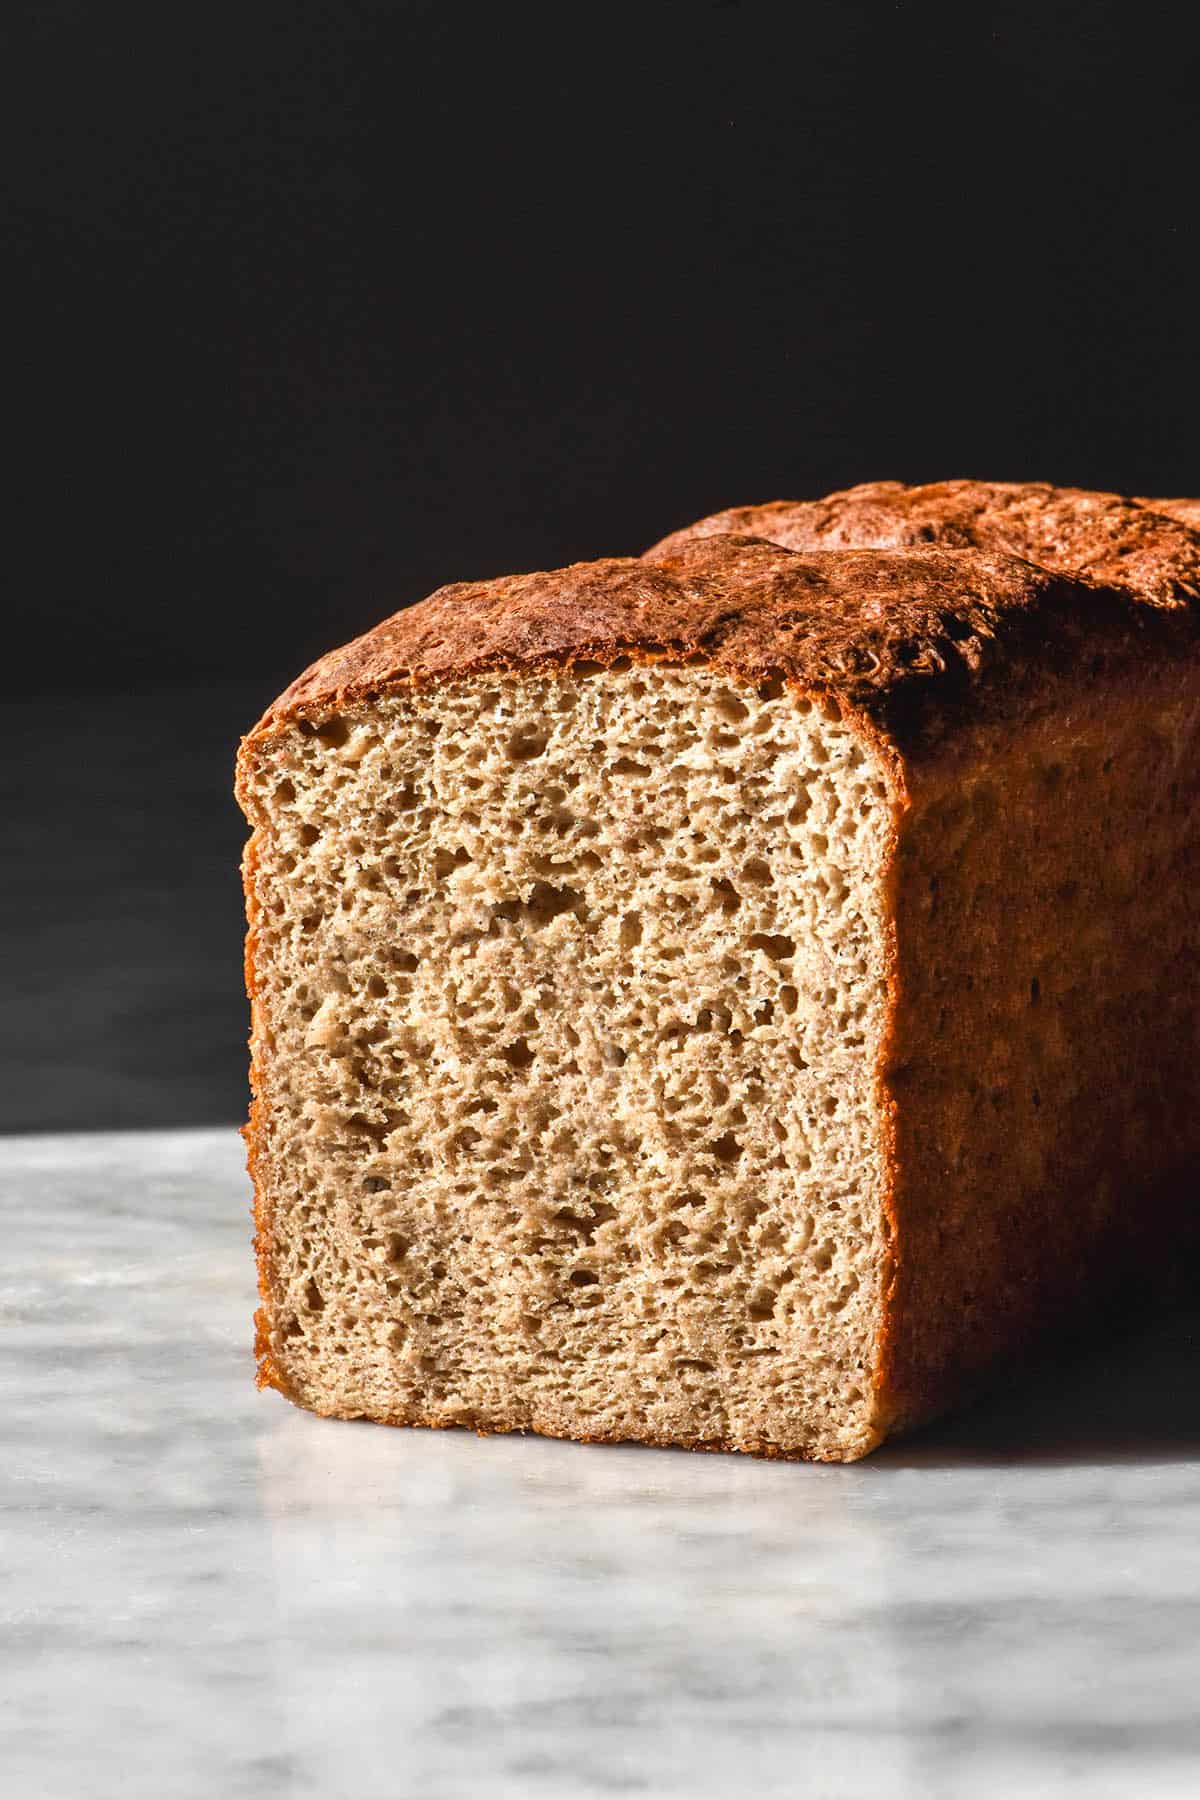 A side on image of a loaf of high protein buckwheat bread on a white marble table in contrasting sunlight. The loaf has been sliced to reveal the inner crumb.